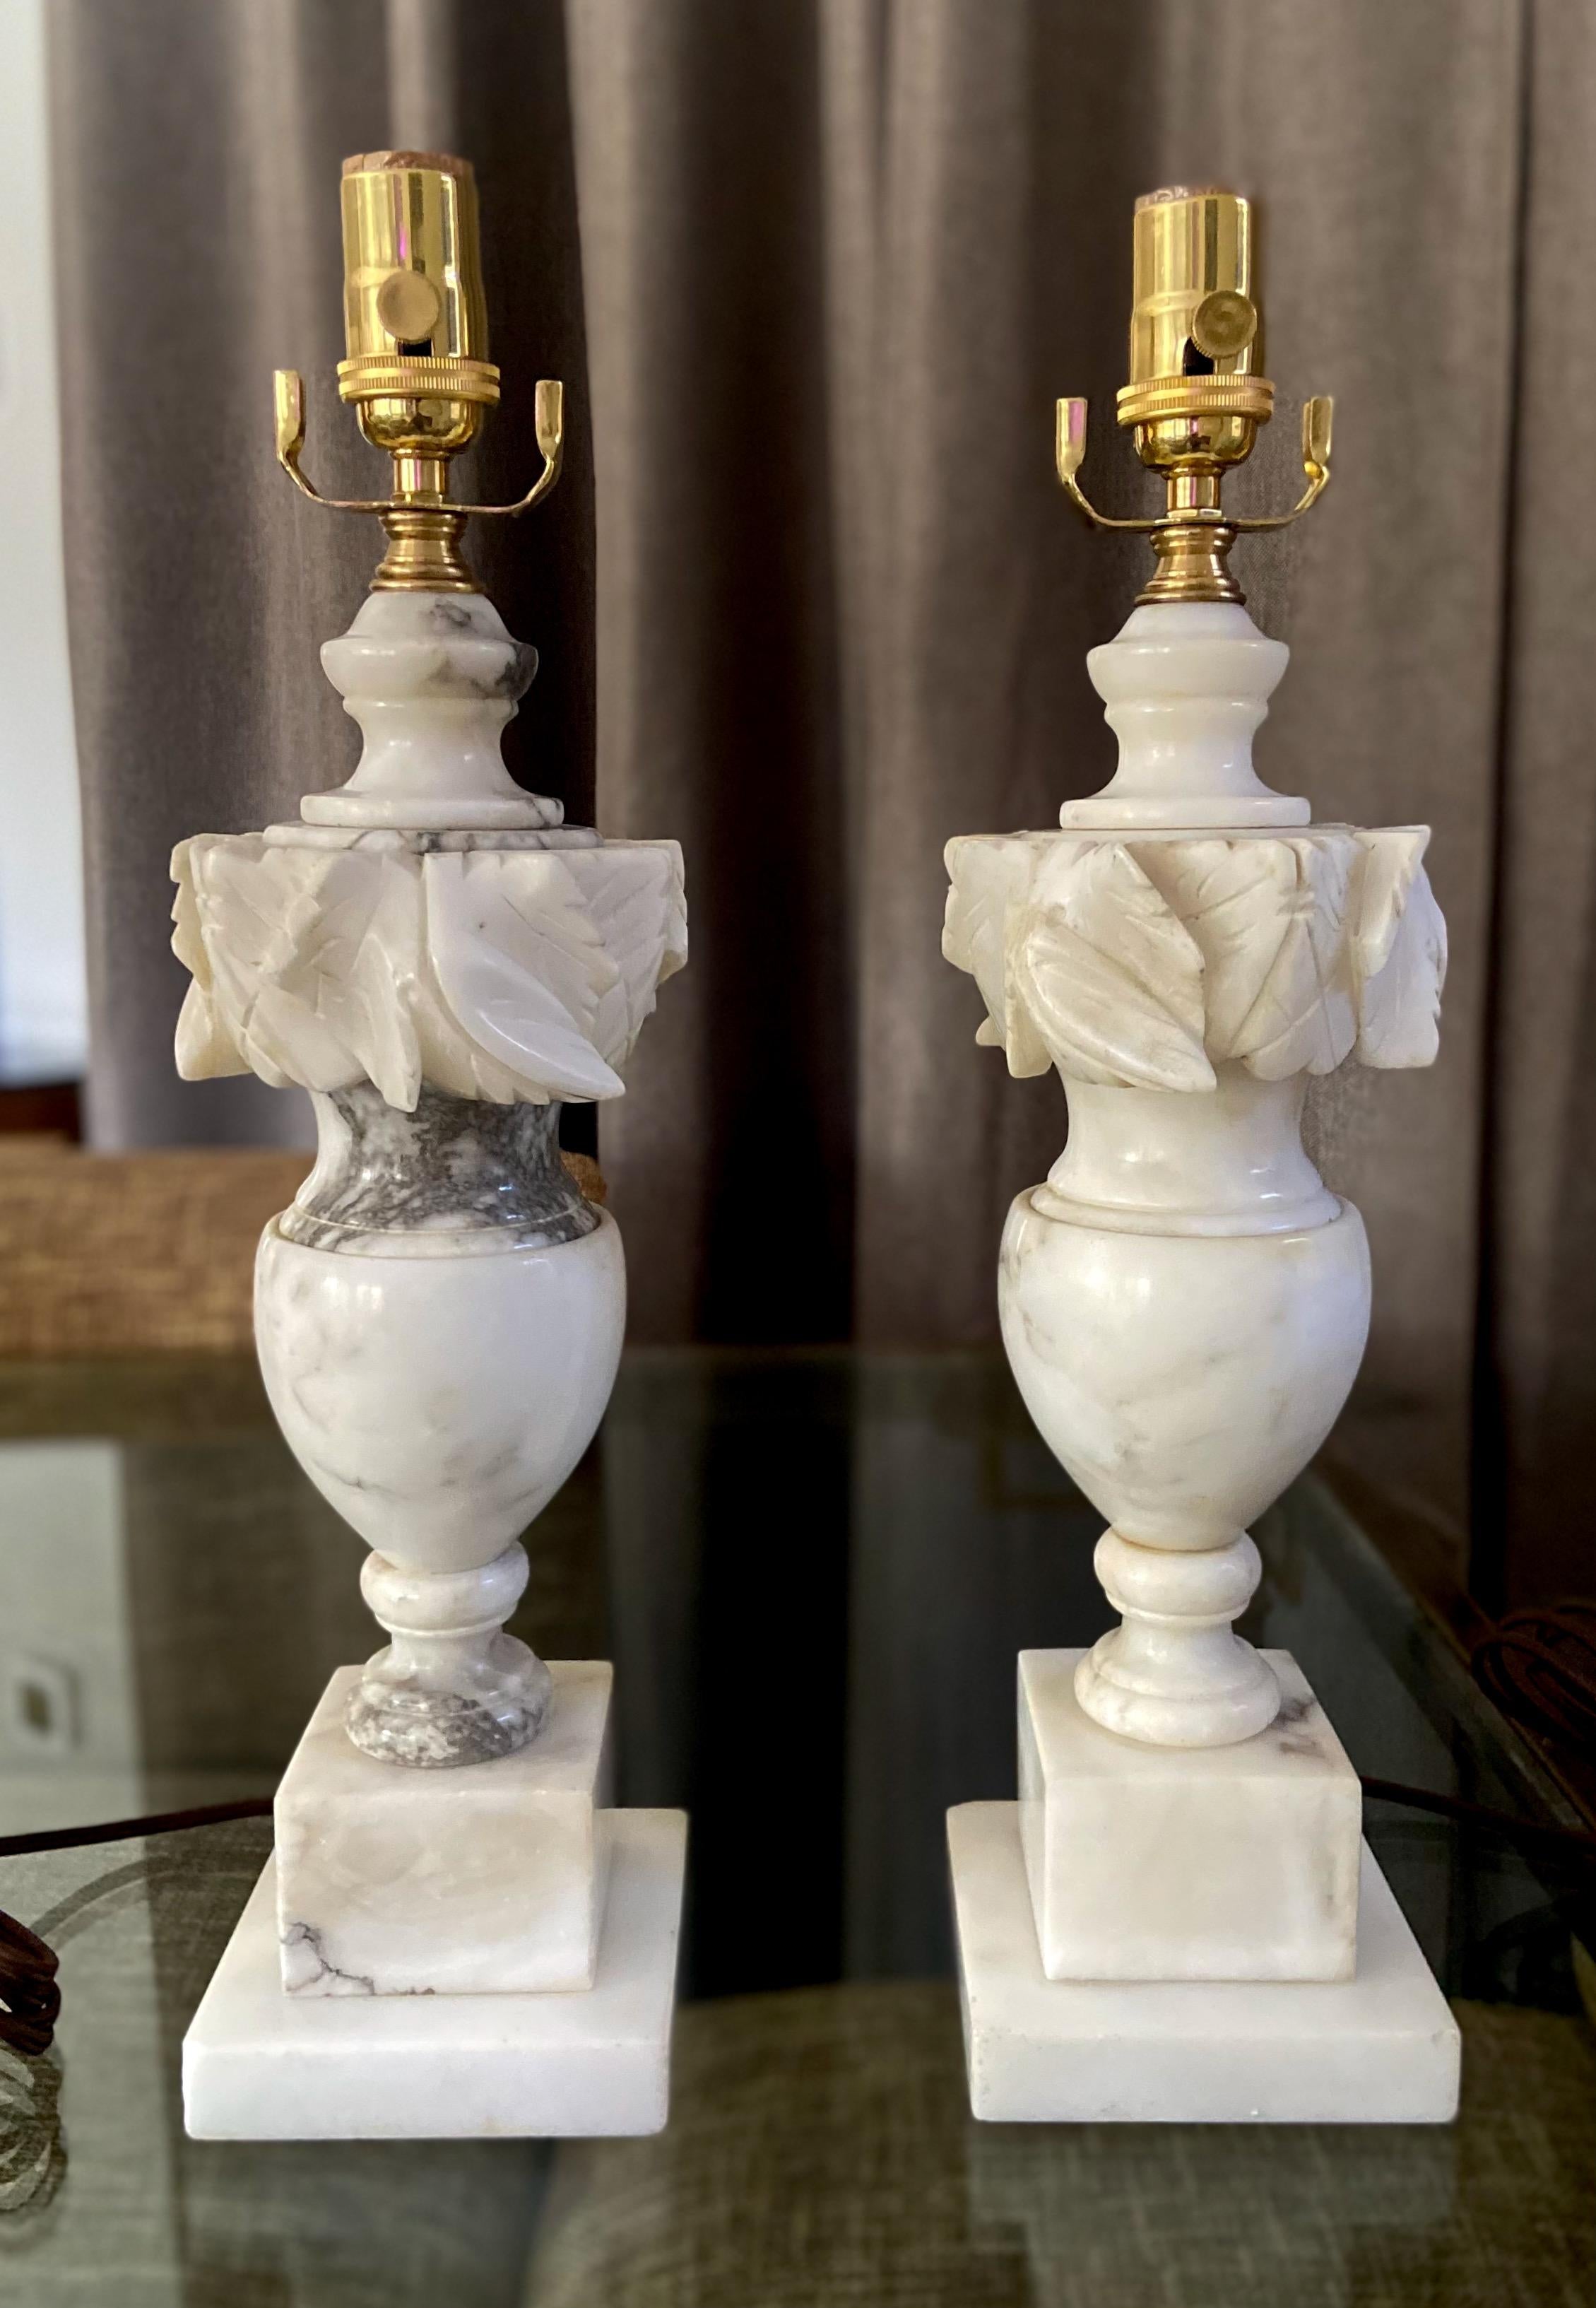 Pair of finely crafted hand carved neo-classic style urn form alabaster lamps. The intricately carved white alabaster are covered with lots natural colorful veining. Newly wired with 3 way sockets and rayon covered cords.

